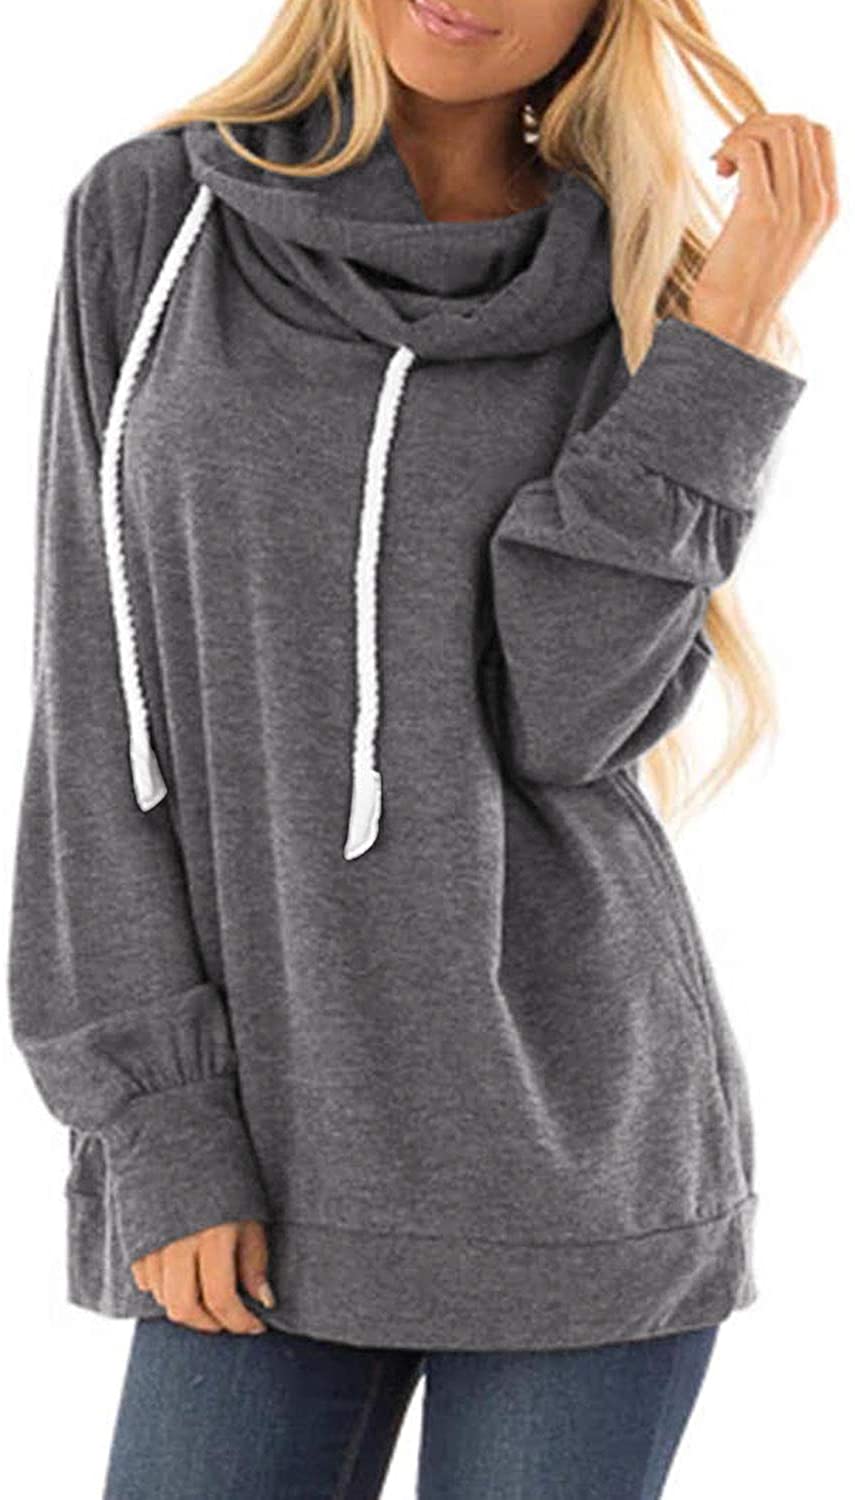 Dearlovers Womens Cowl Neck Hooded Sweatshirt Casual Long Sleeve Loose Color Block Pullover Top